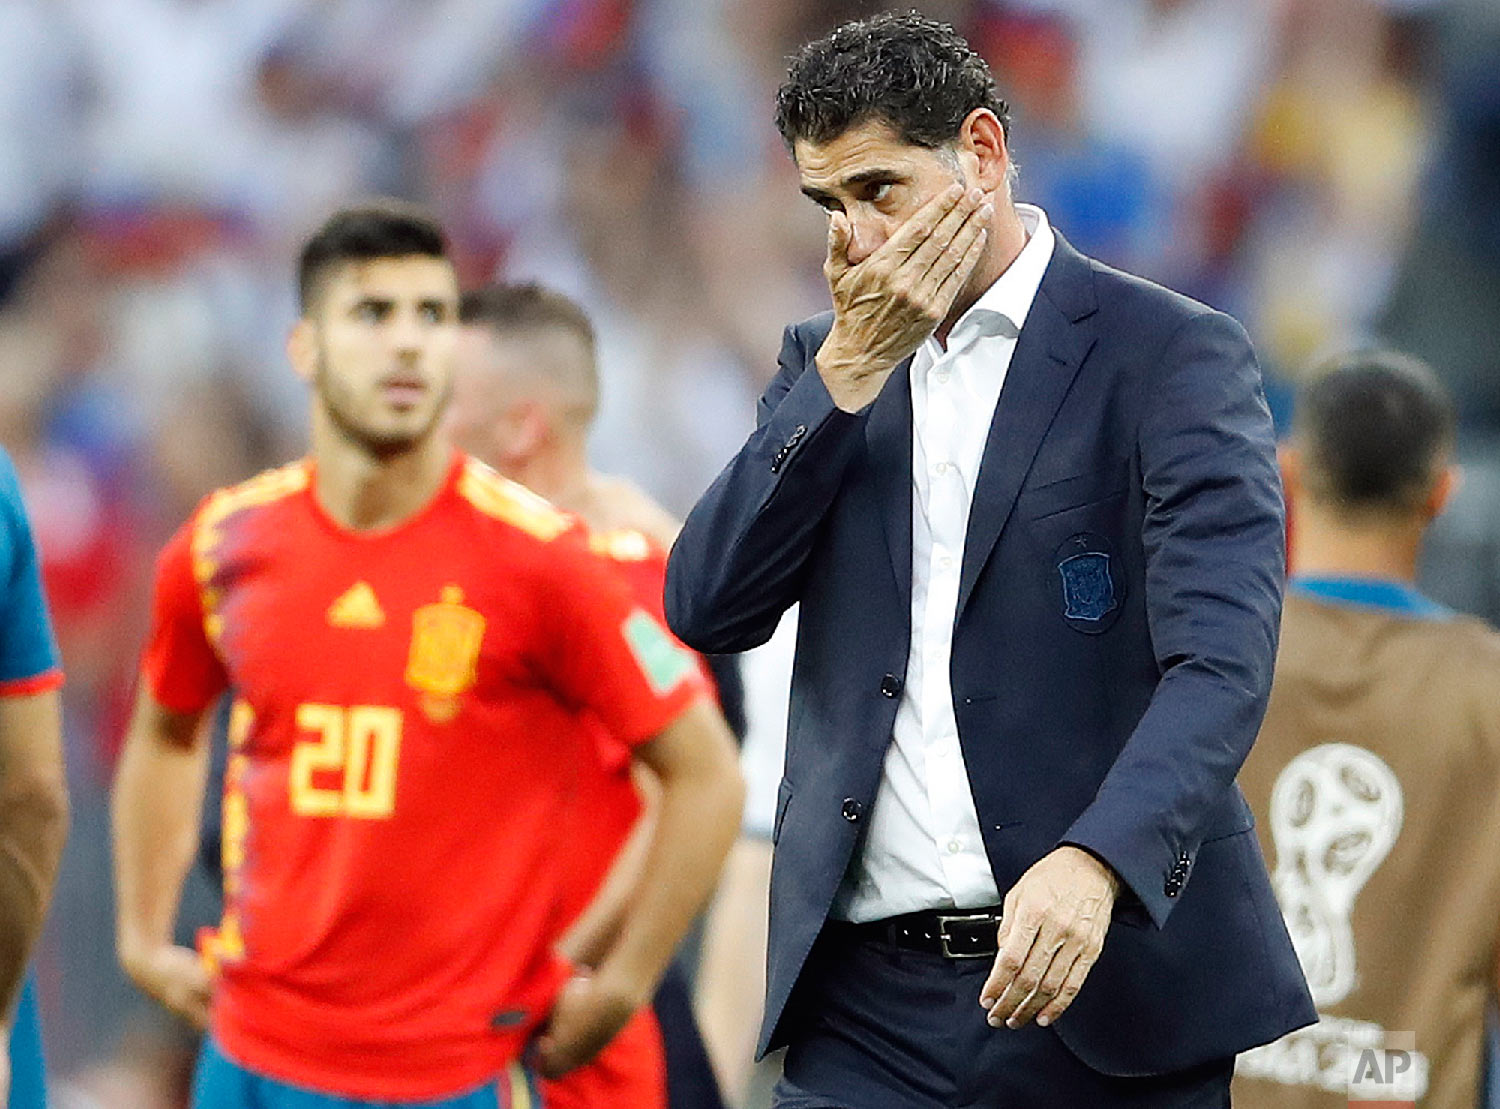  Spain head coach Fernando Hierro reacts after his team lost by penalty shootout during the round of 16 match between Spain and Russia at the 2018 soccer World Cup at the Luzhniki Stadium in Moscow, Russia, Sunday, July 1, 2018. (AP Photo/Antonio Cal